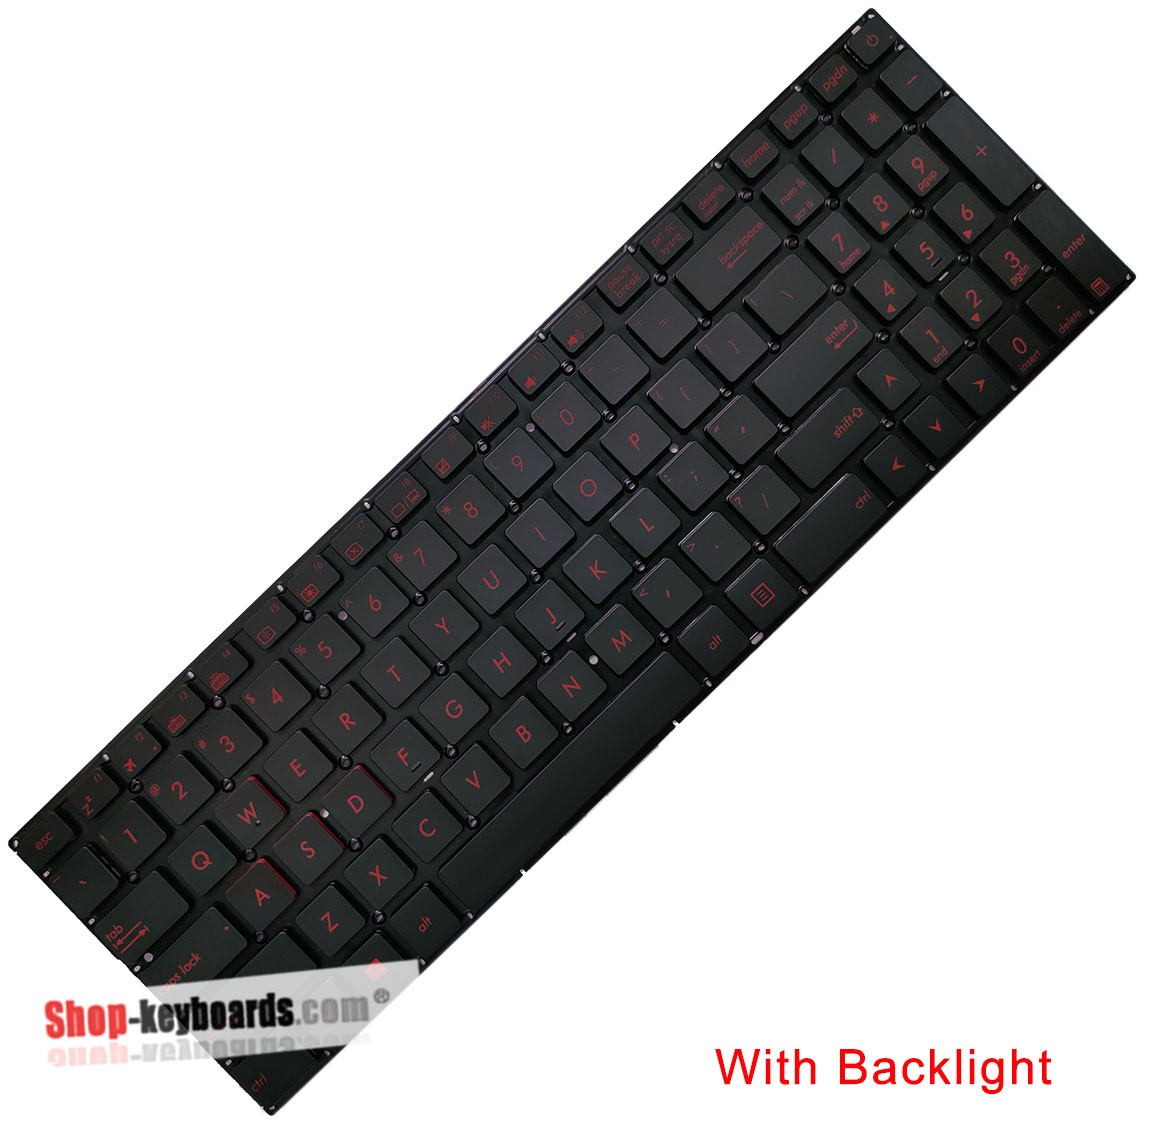 Asus UX501VW-FY075R  Keyboard replacement